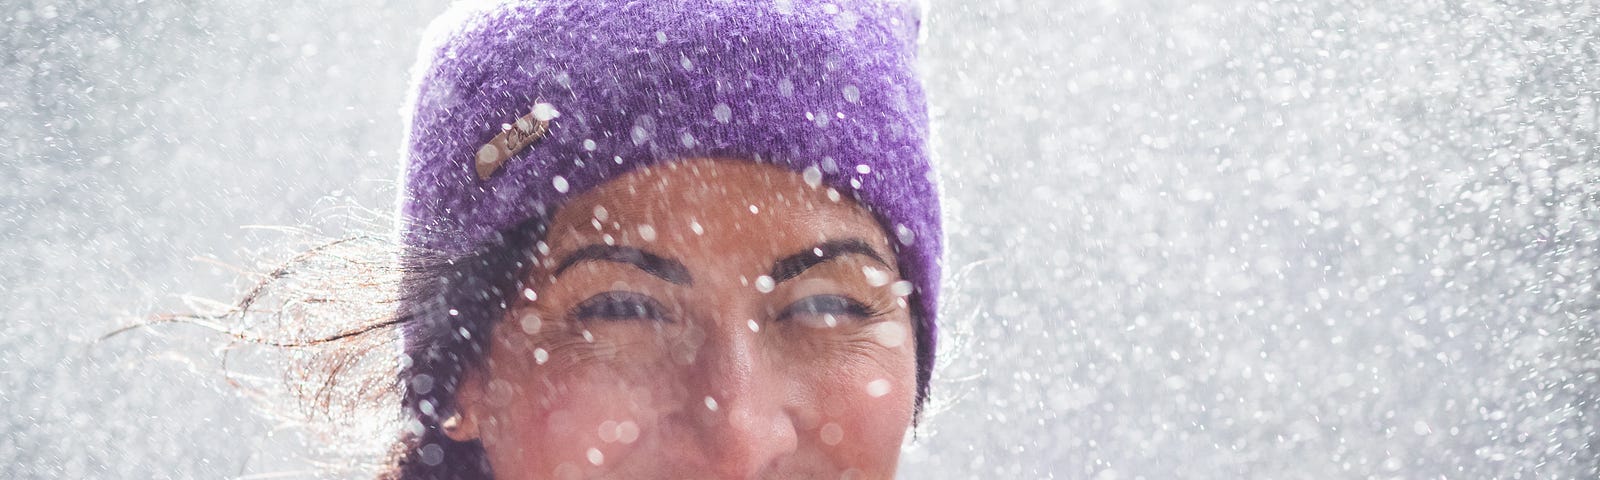 A woman smiling with snowflakes all around her.